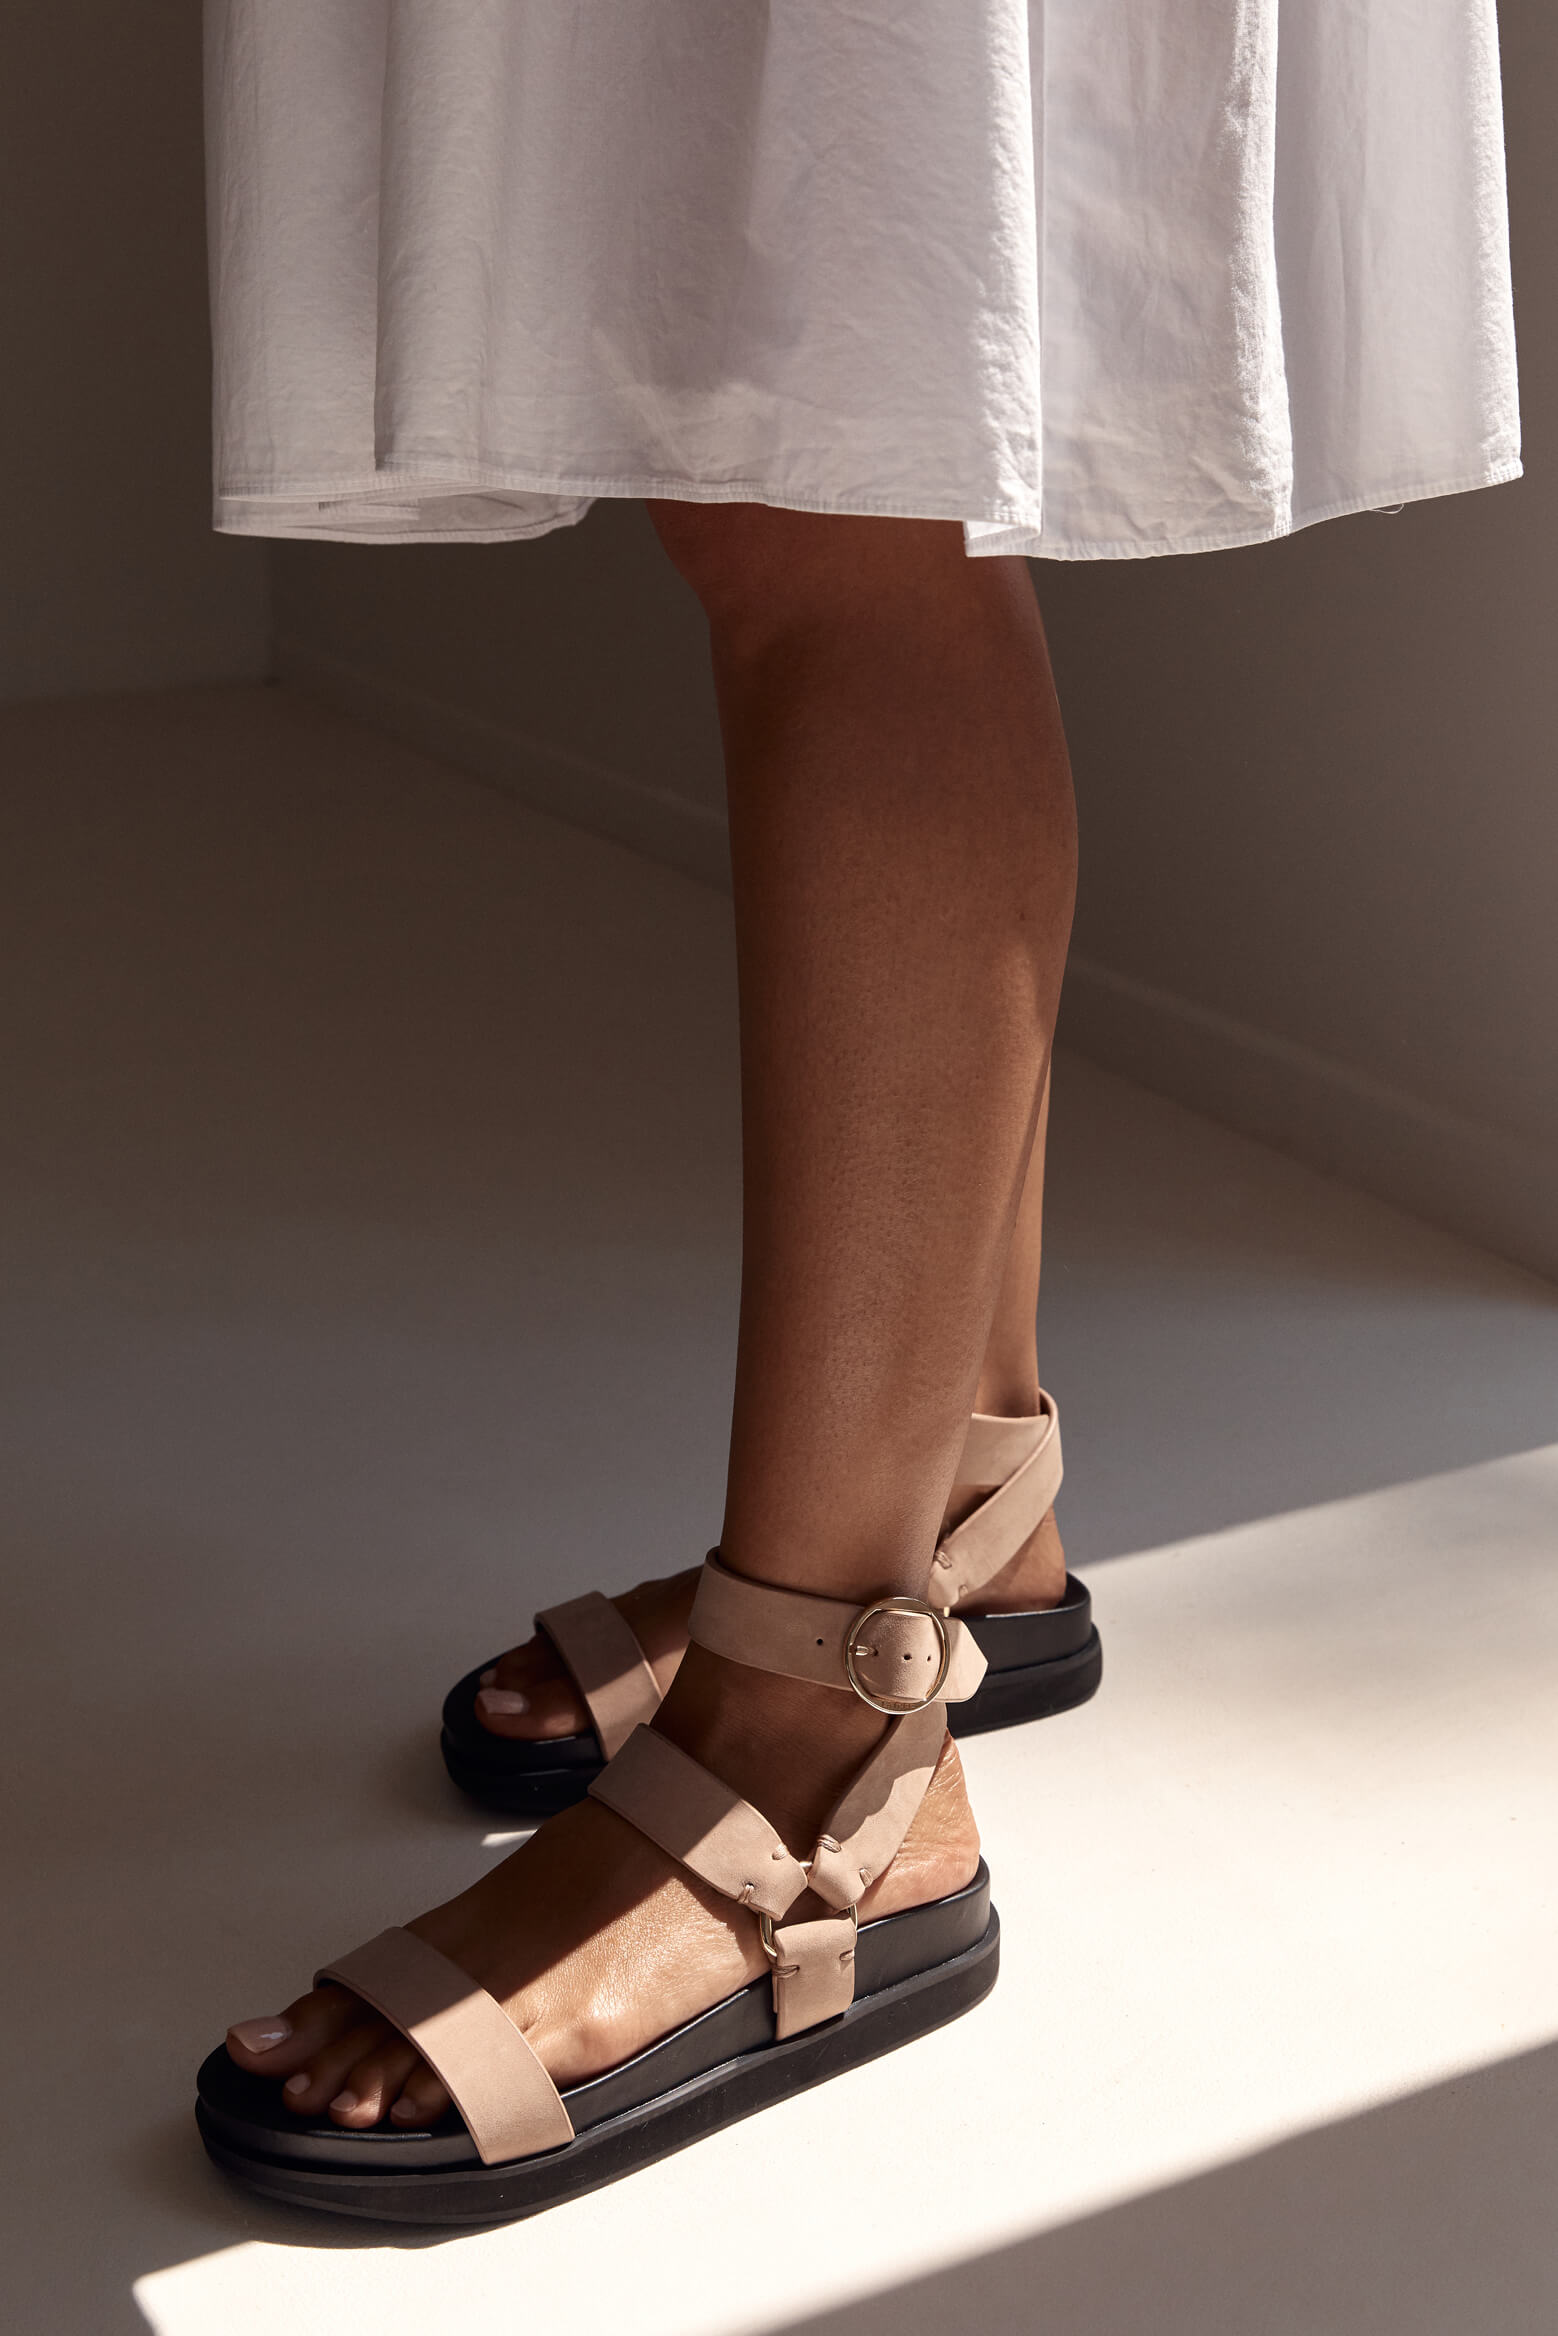 La Tribe Platform Sandals in Taupe from The New Trend